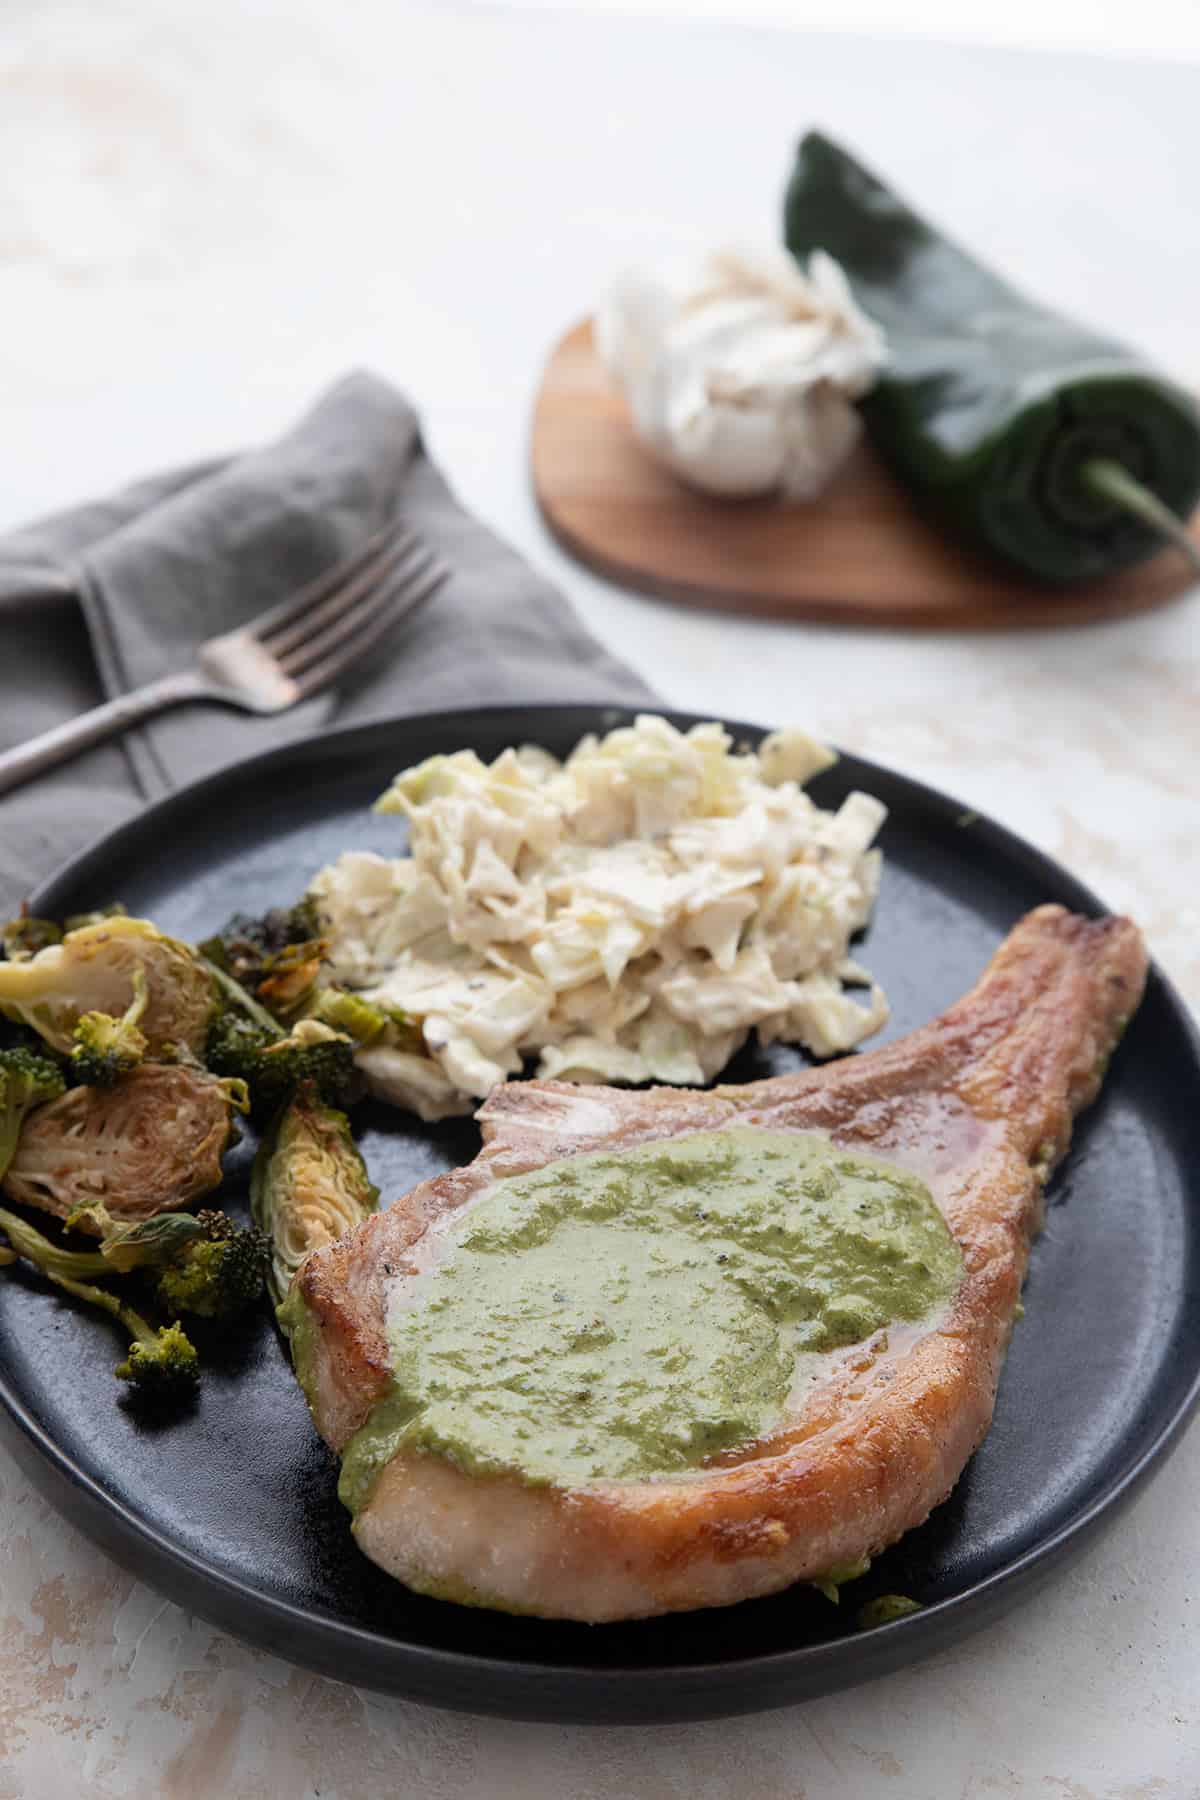 A pork chop topped with poblano sauce on a black plate.